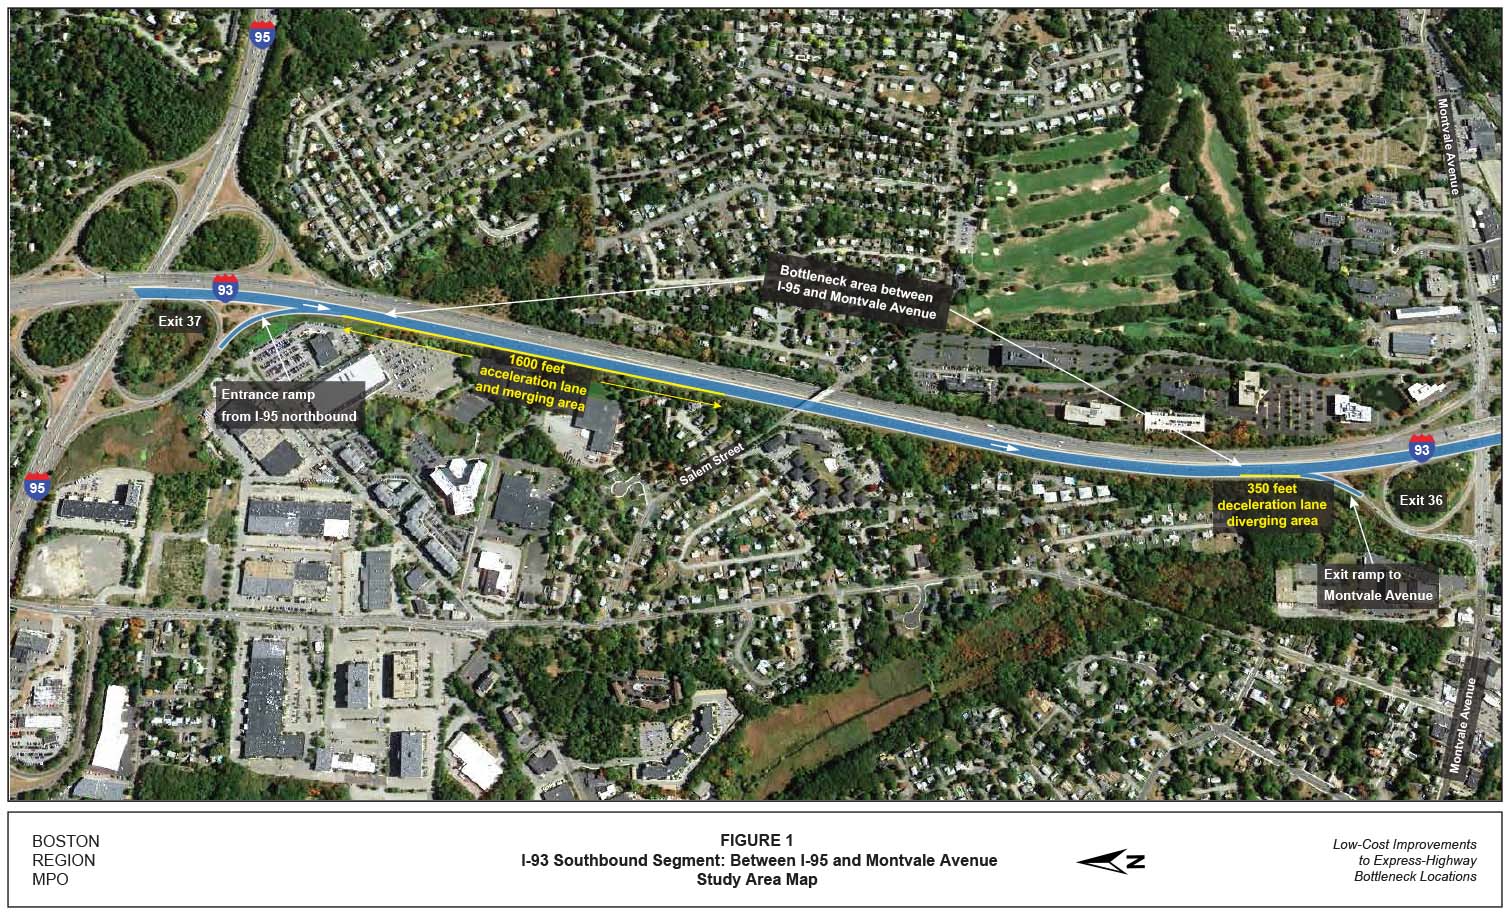 FIGURE 1. Aerial-view map showing the study area on the I-93 southbound segment between I-95 and Montvale Avenue